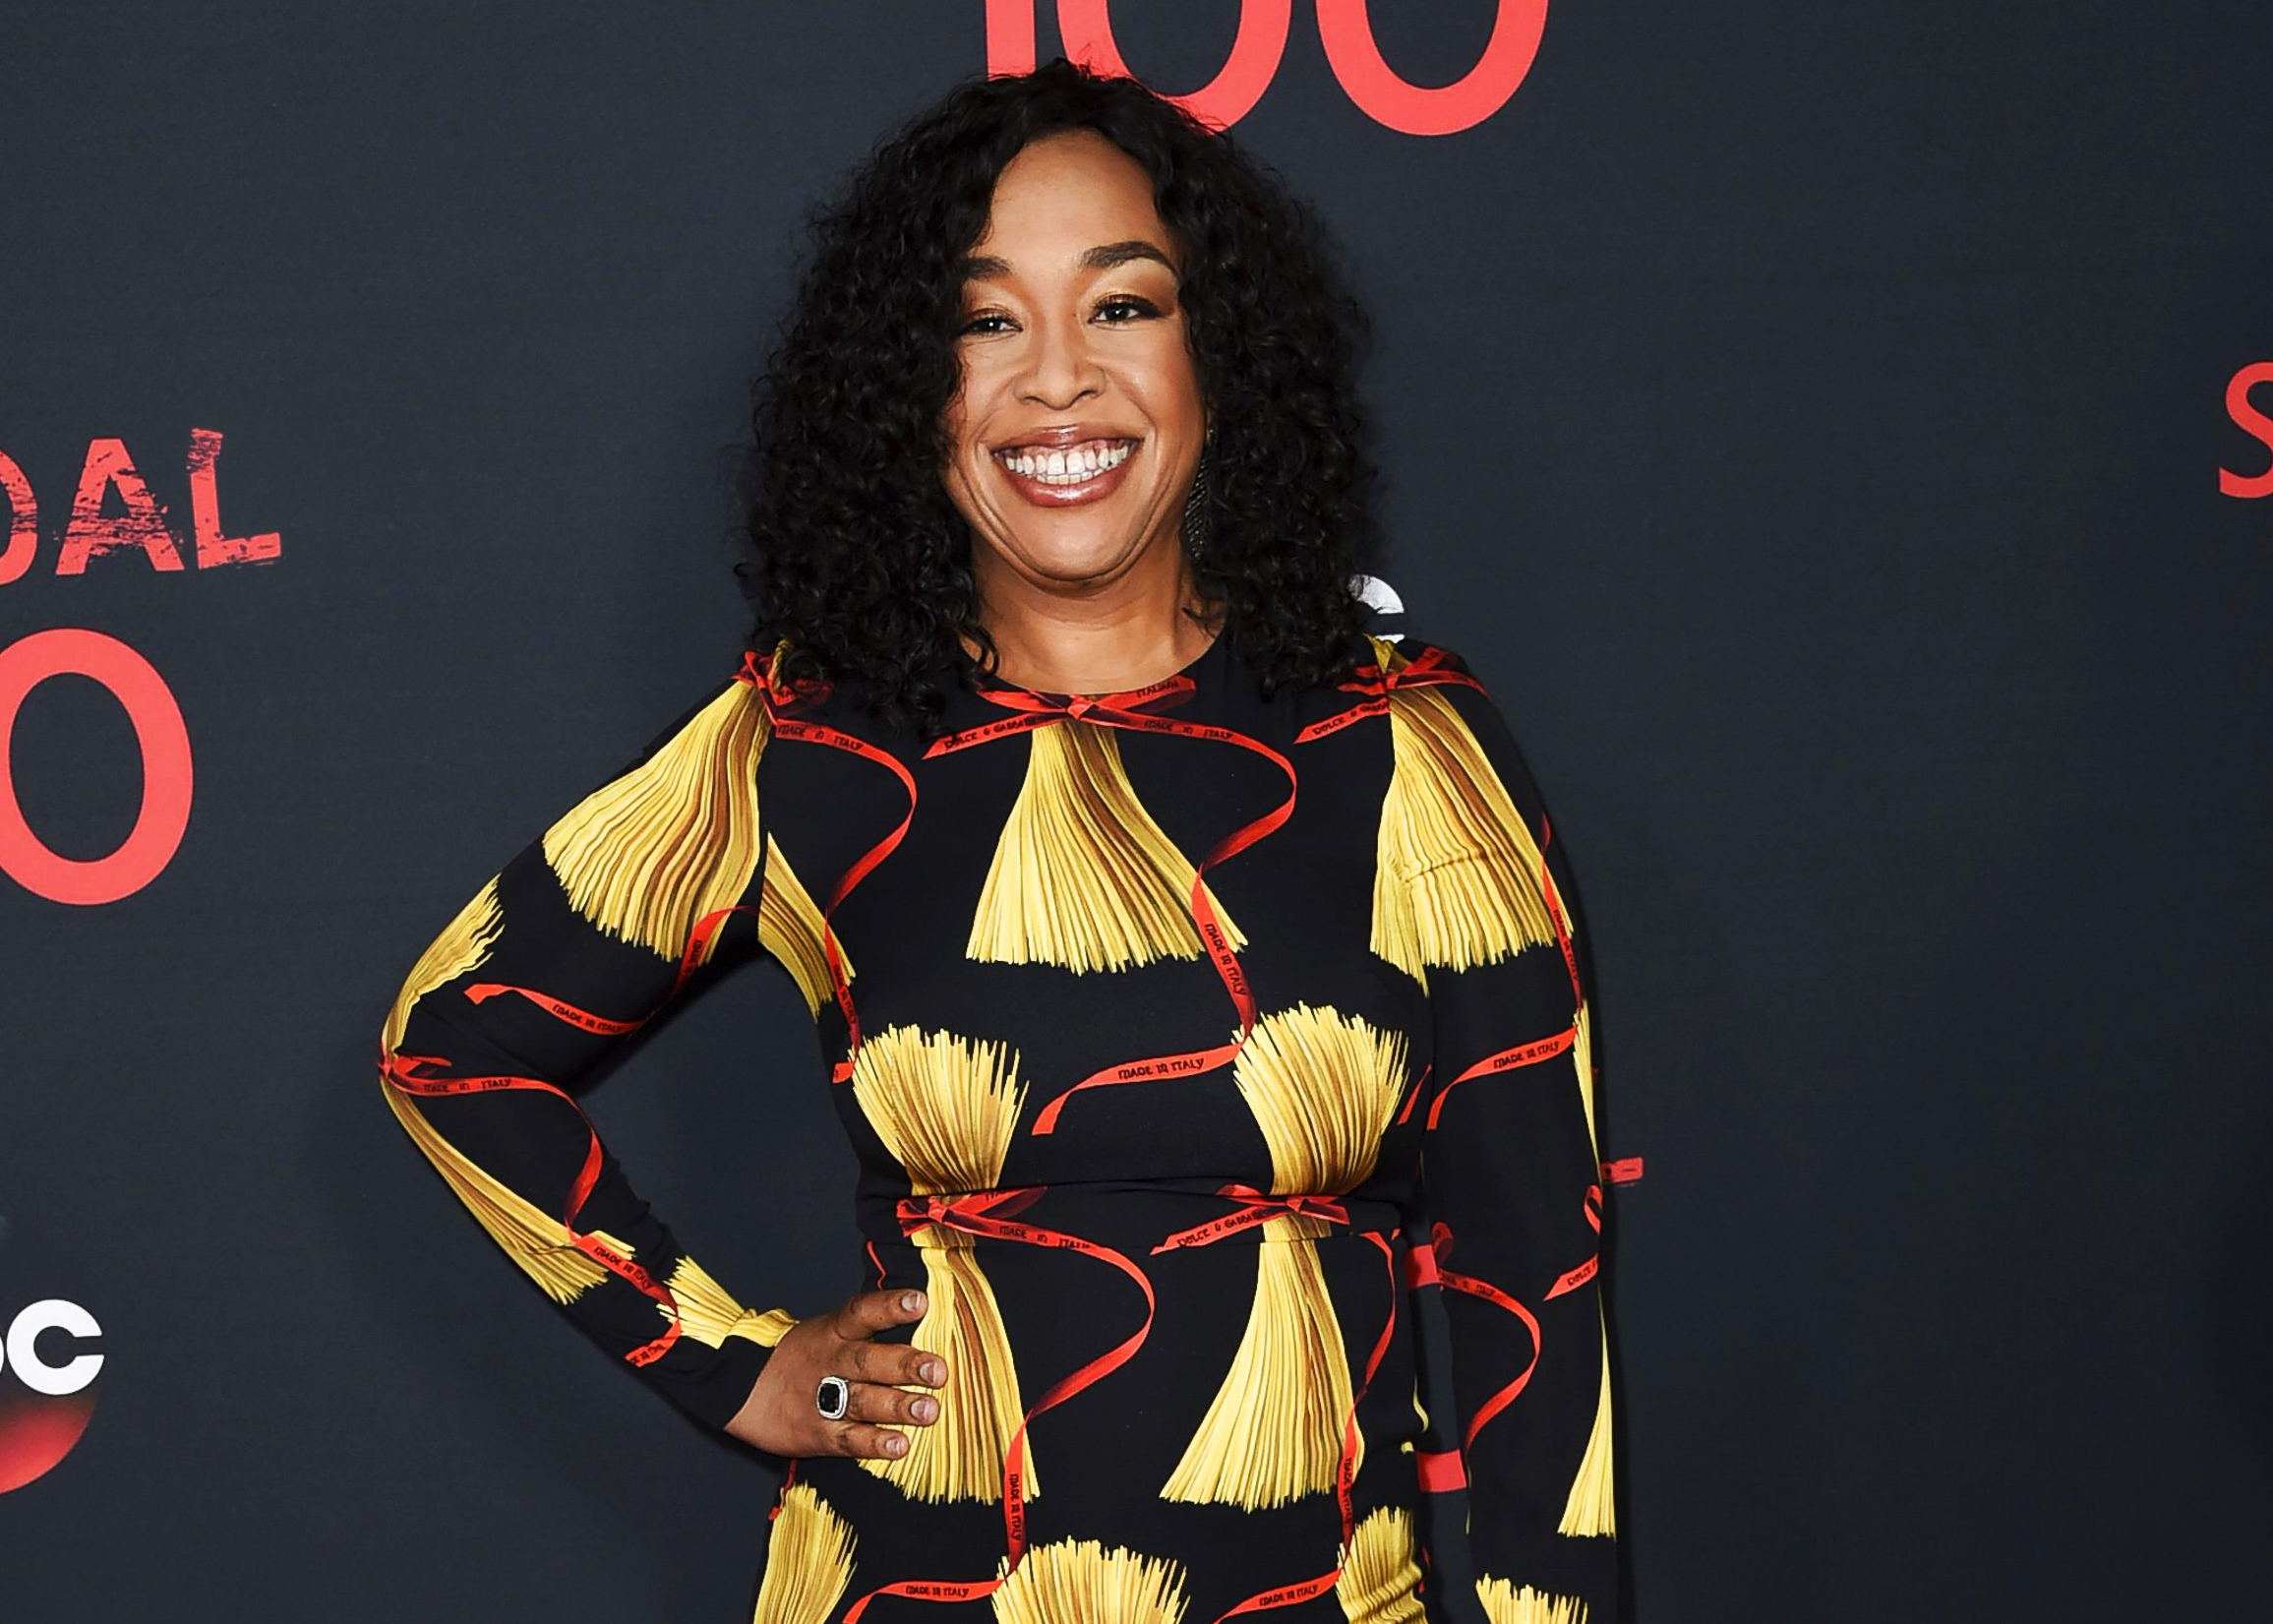 Shonda Rimes Discusses the End of 'Grey's Anatomy'